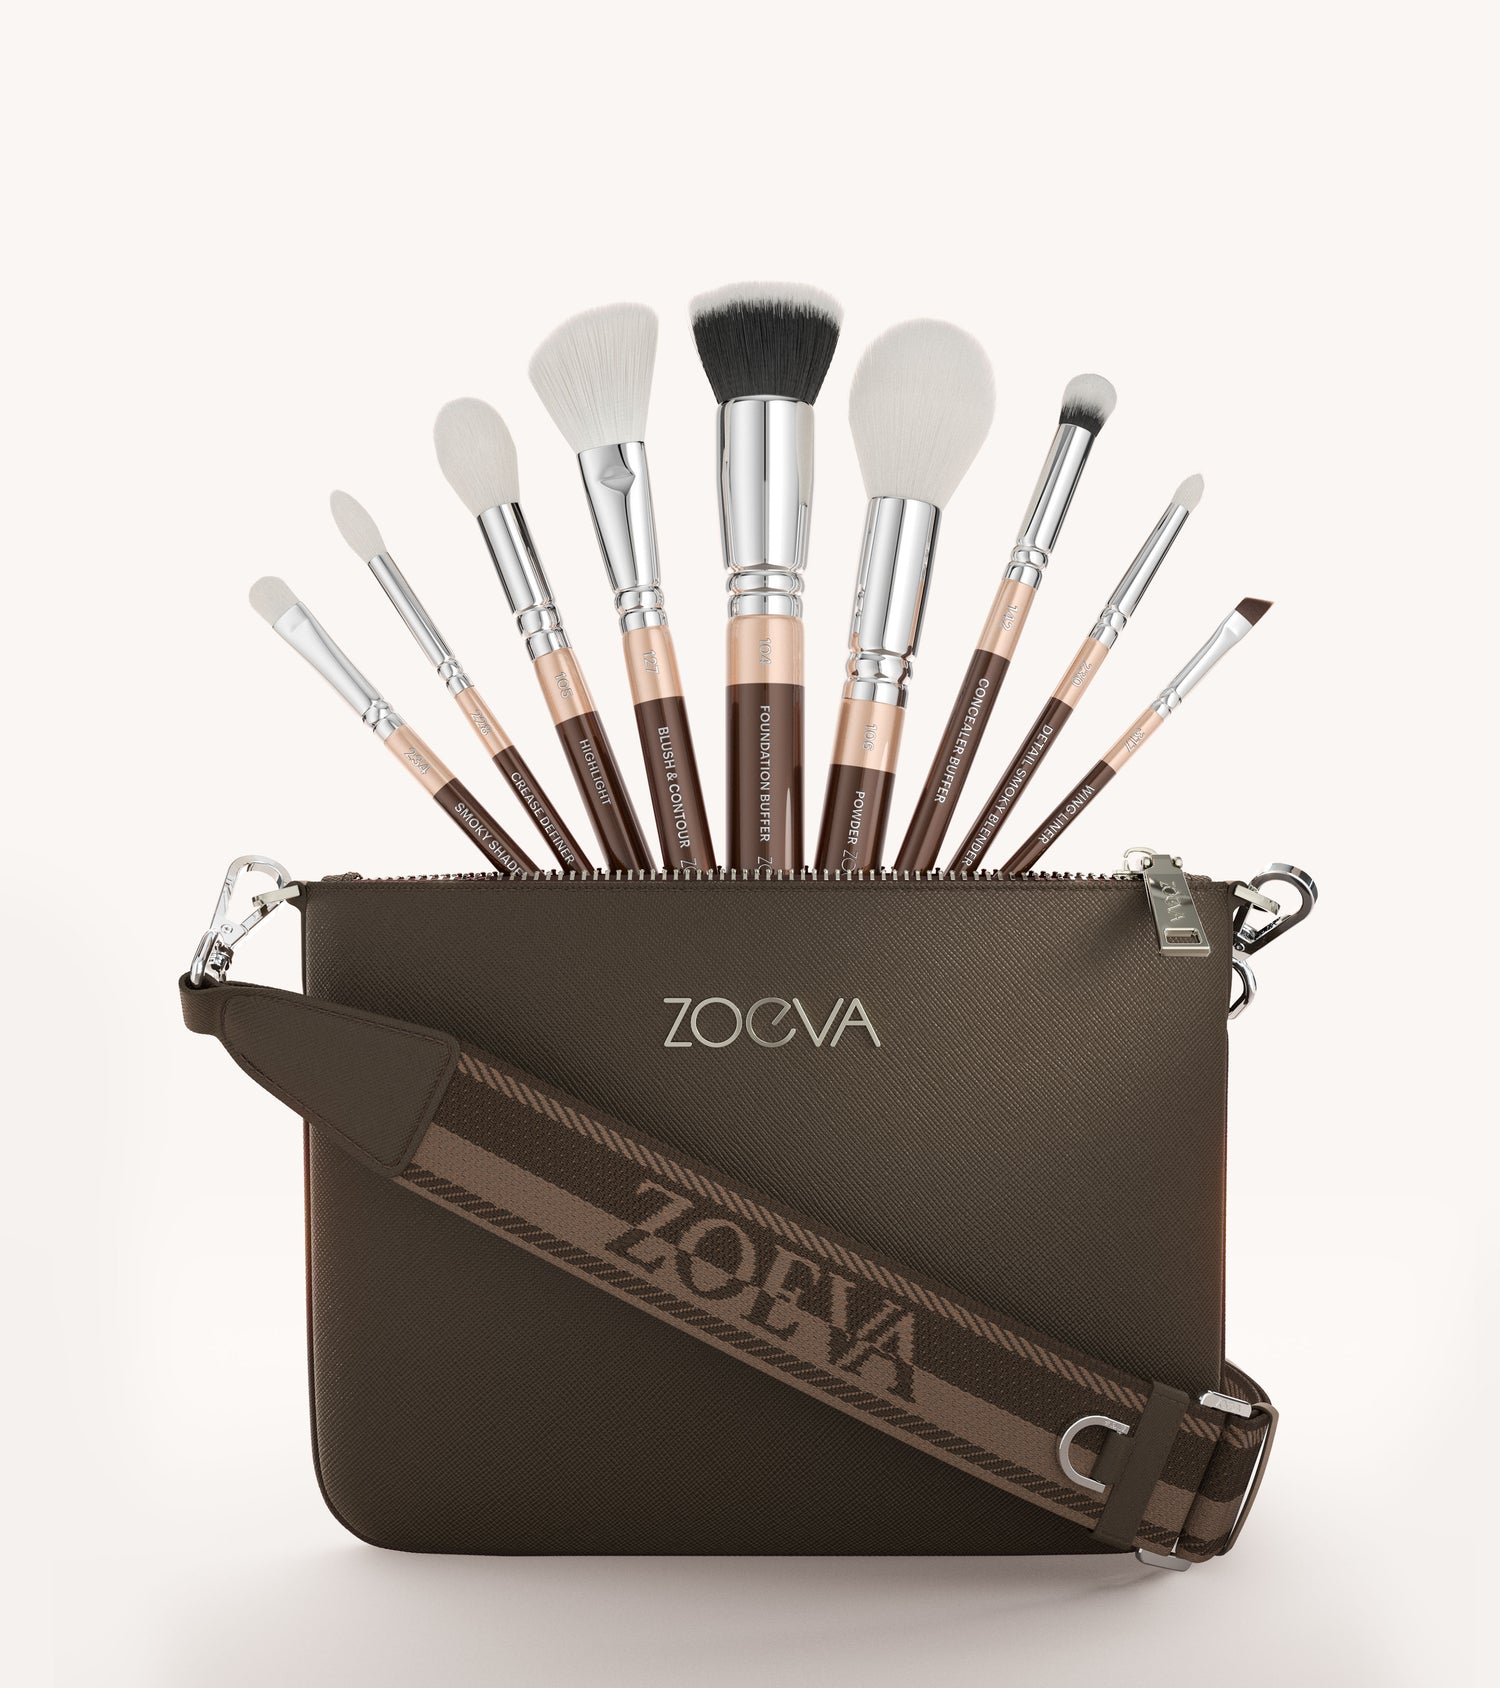 ZOEVA - The Complete Pinselset & Shoulder Strap (Chocolate) - BRUSH SET